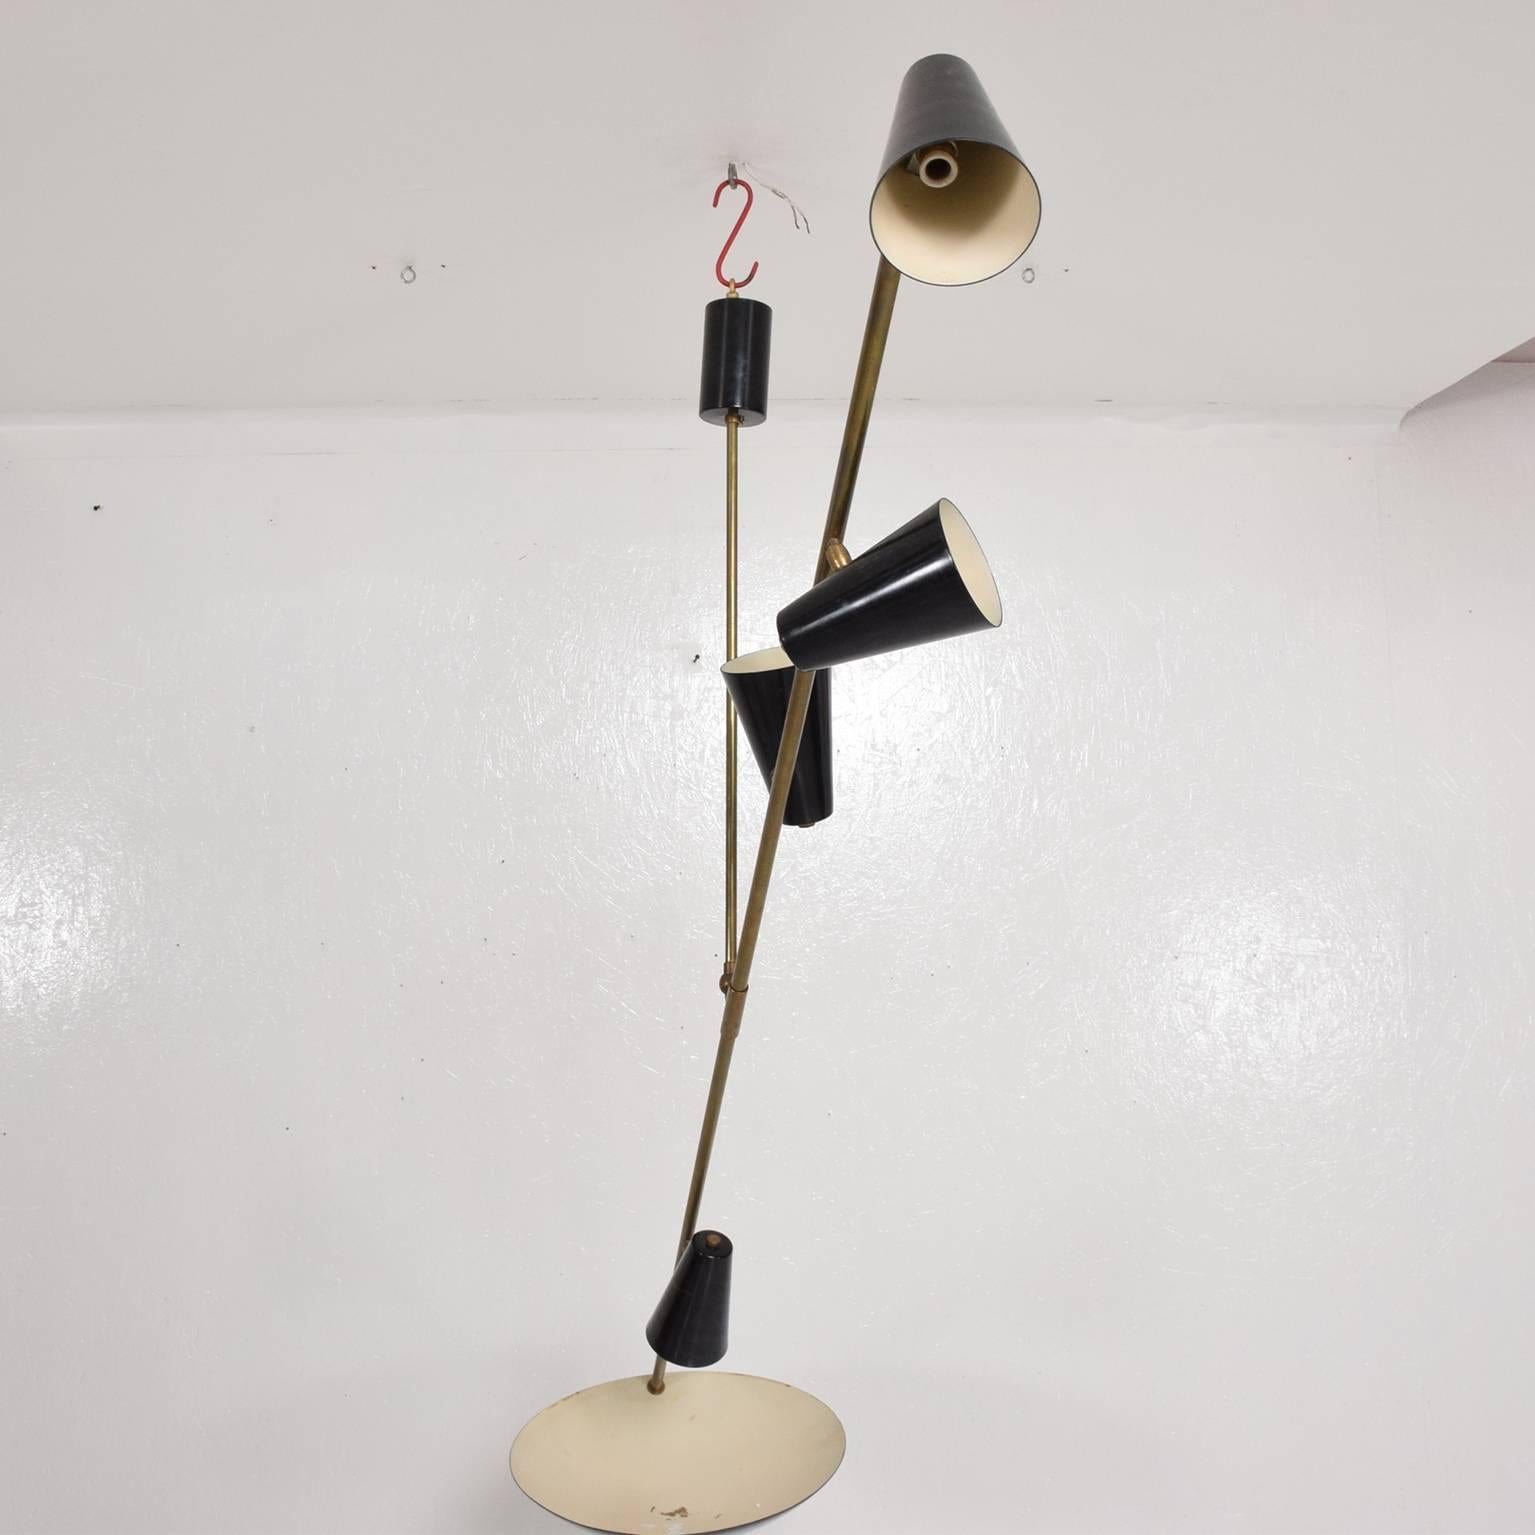 Contemporary Mid-Century Modern Mobile Hanging Chandelier in the style of Stilnovo